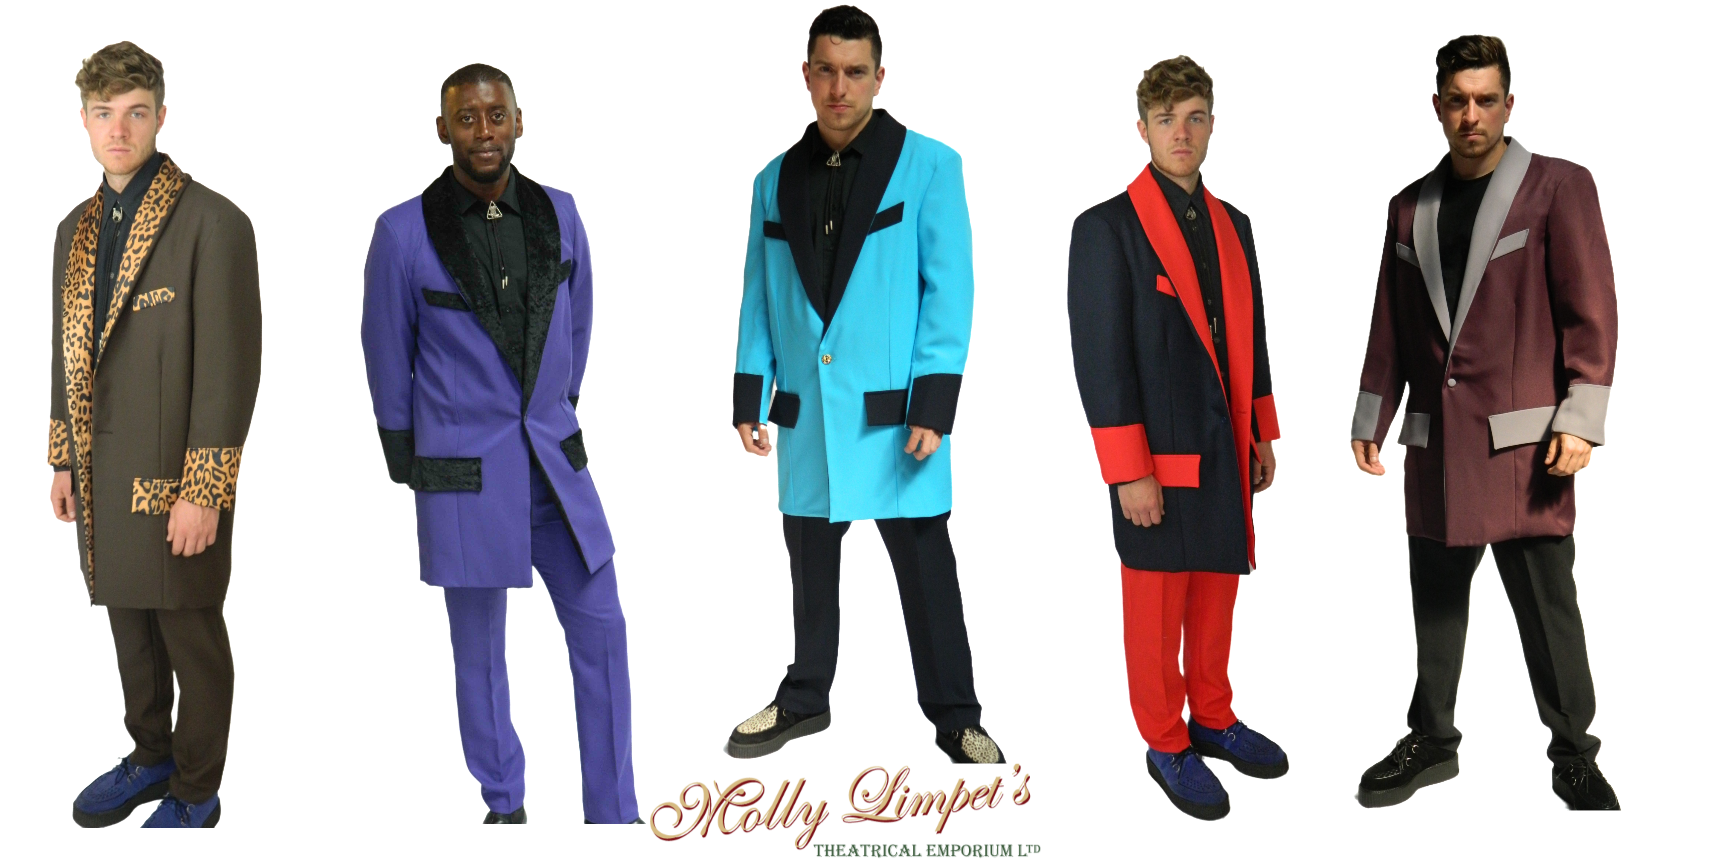 Teddy boy fancy dress costumes and rock n roll theatrical costume hire